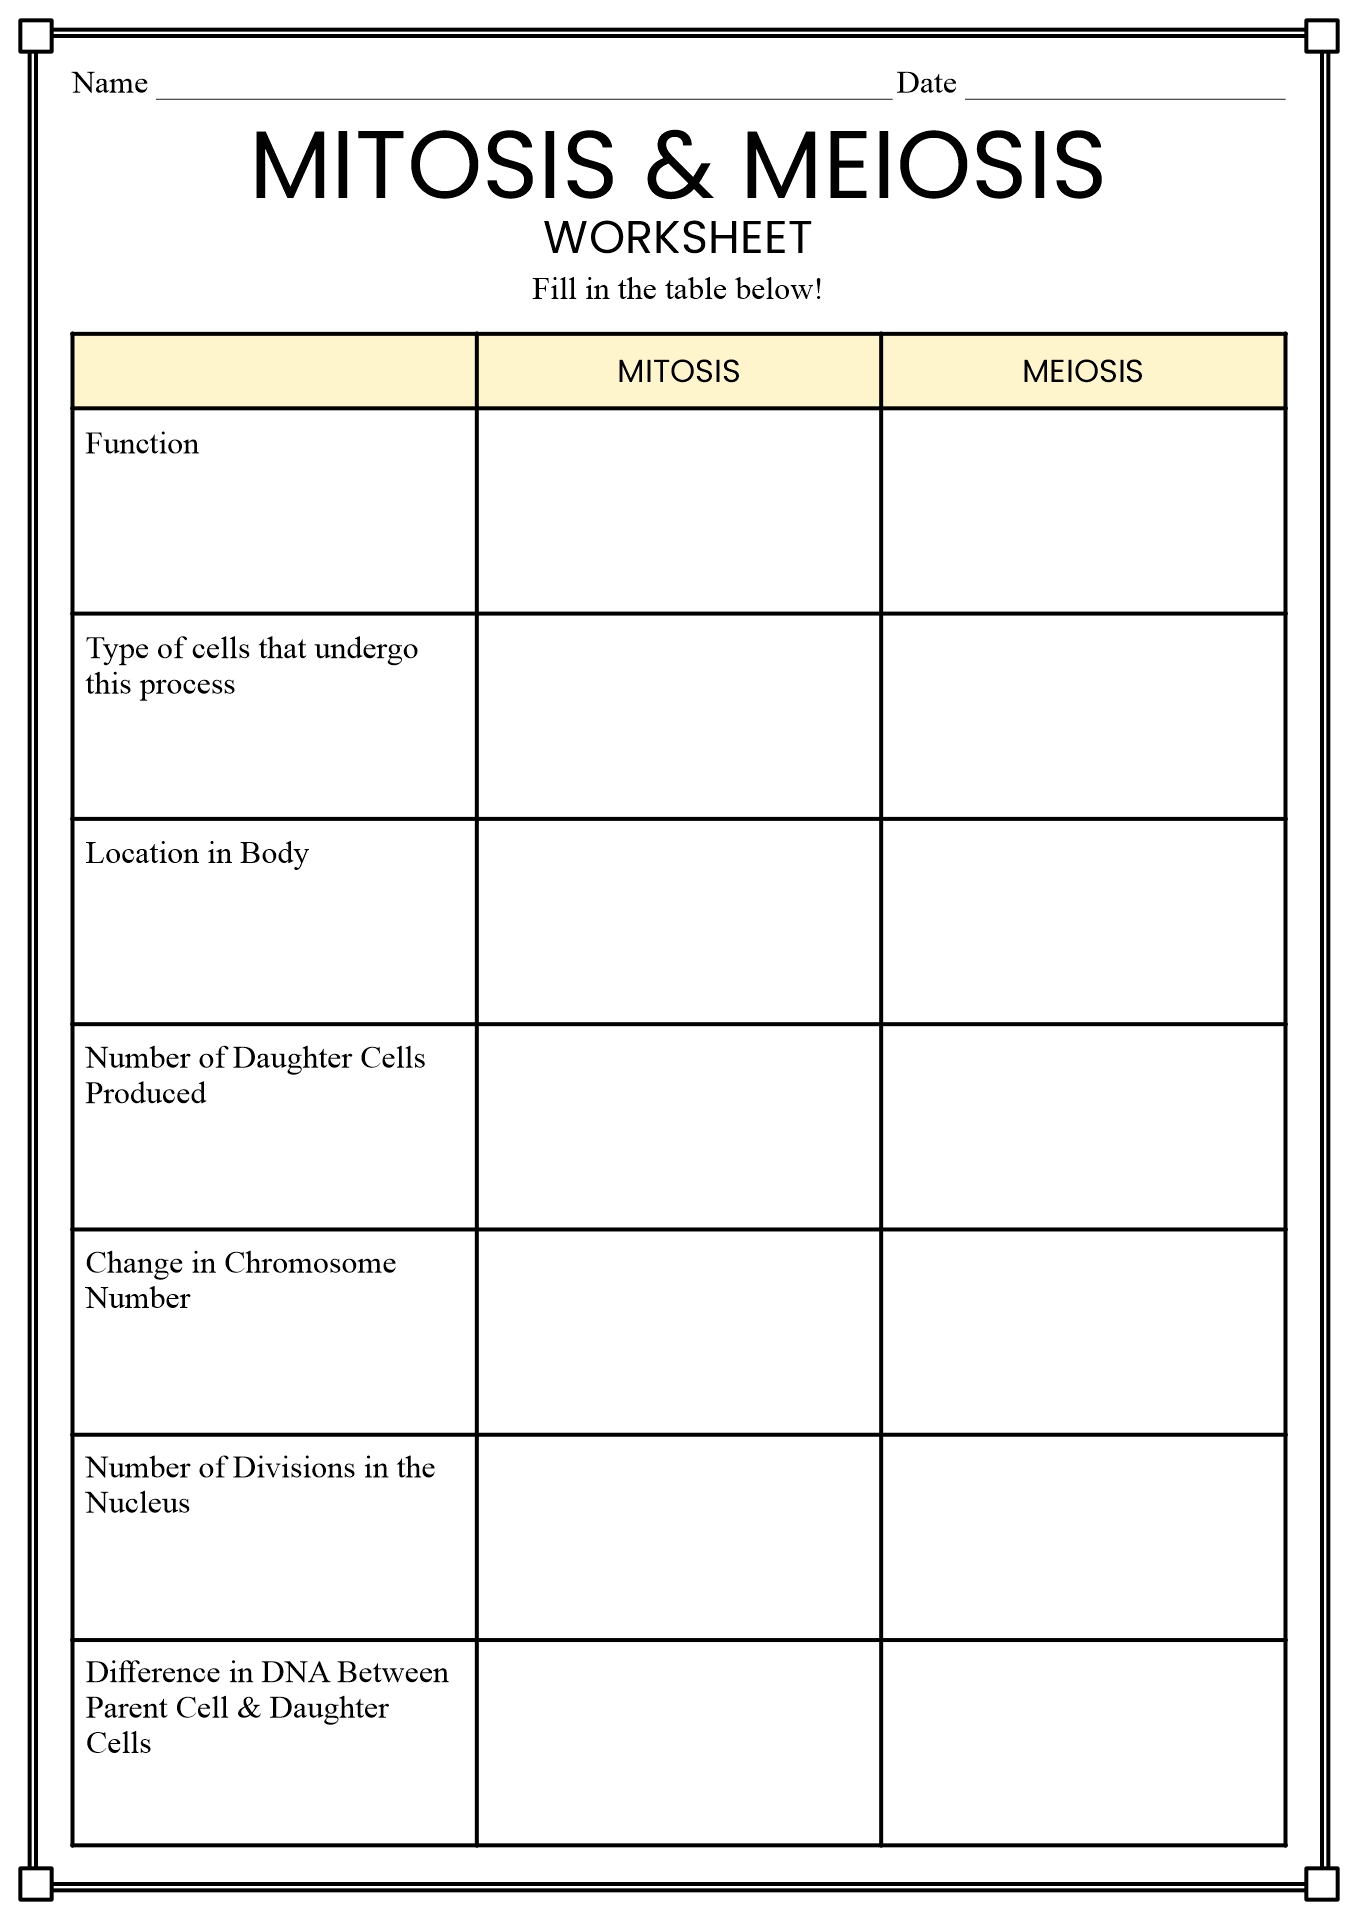 Comparing Mitosis and Meiosis Worksheet